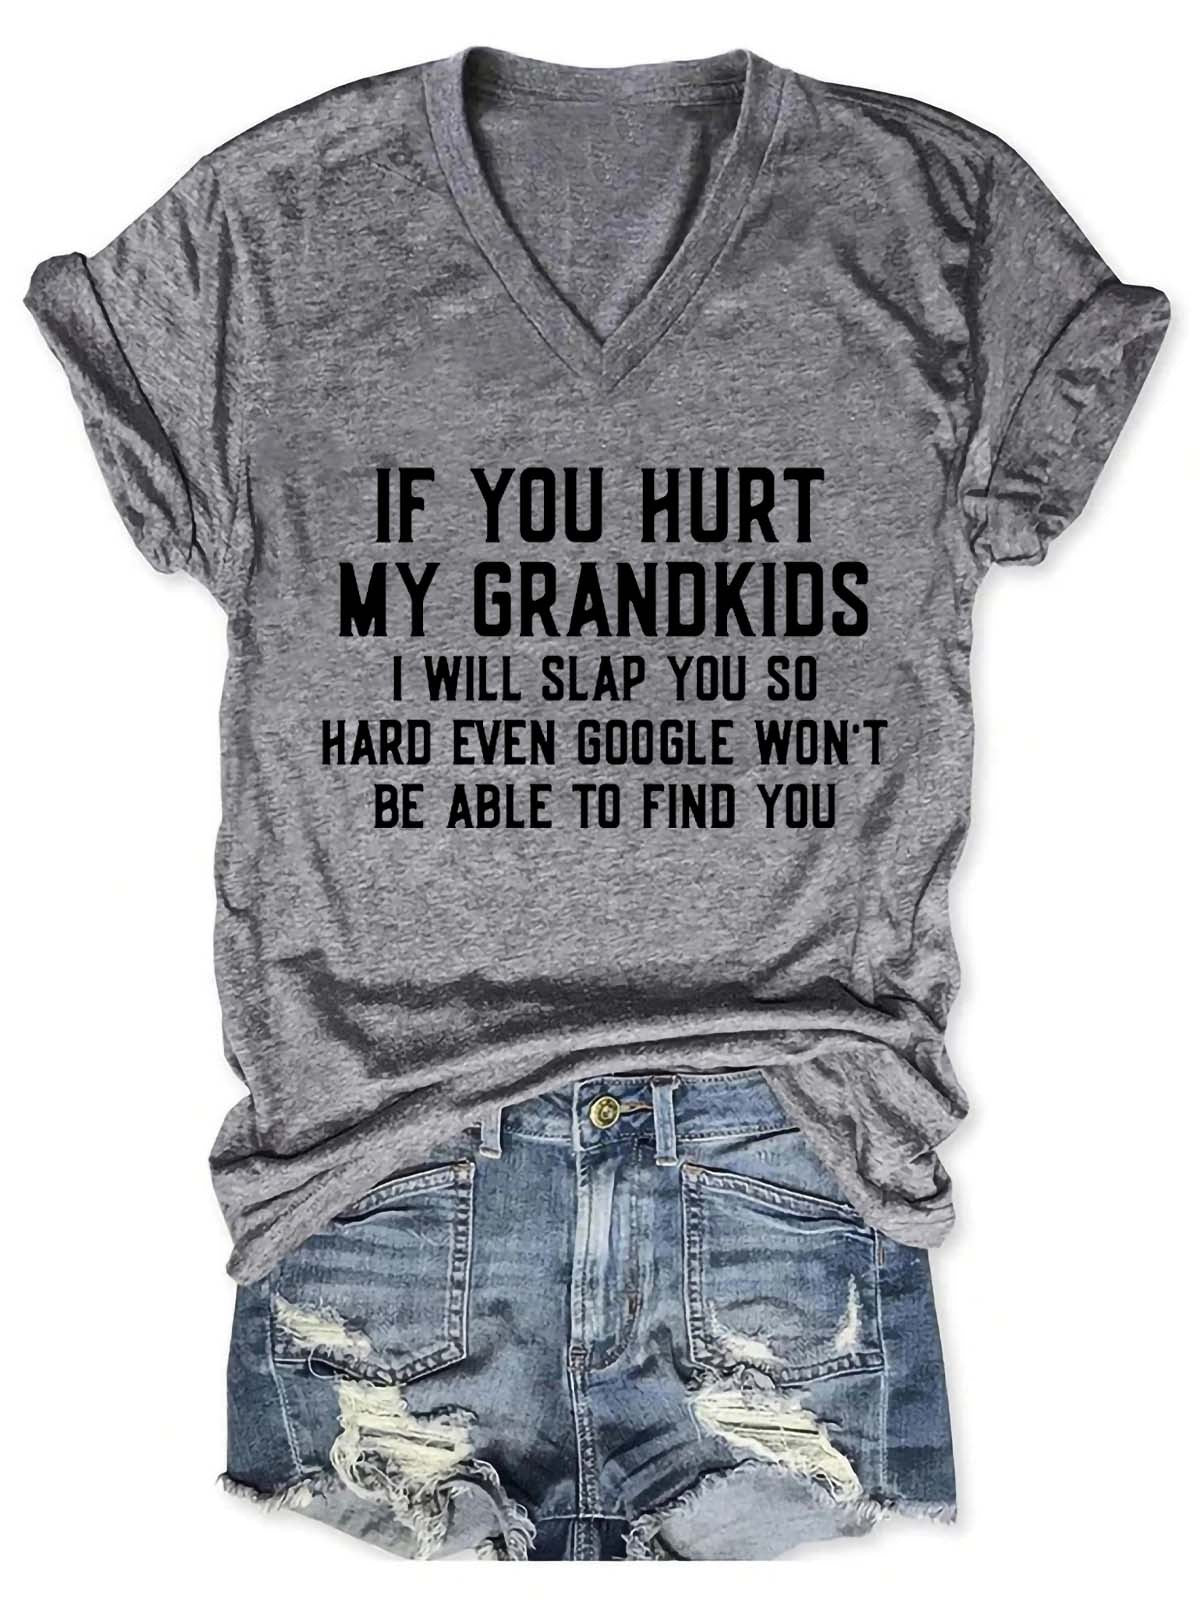 Women's If You Hurt My Grandkids I Will Slap You So Hard Even Google Won't Be Able To Find You V-Neck T-Shirt - Outlets Forever